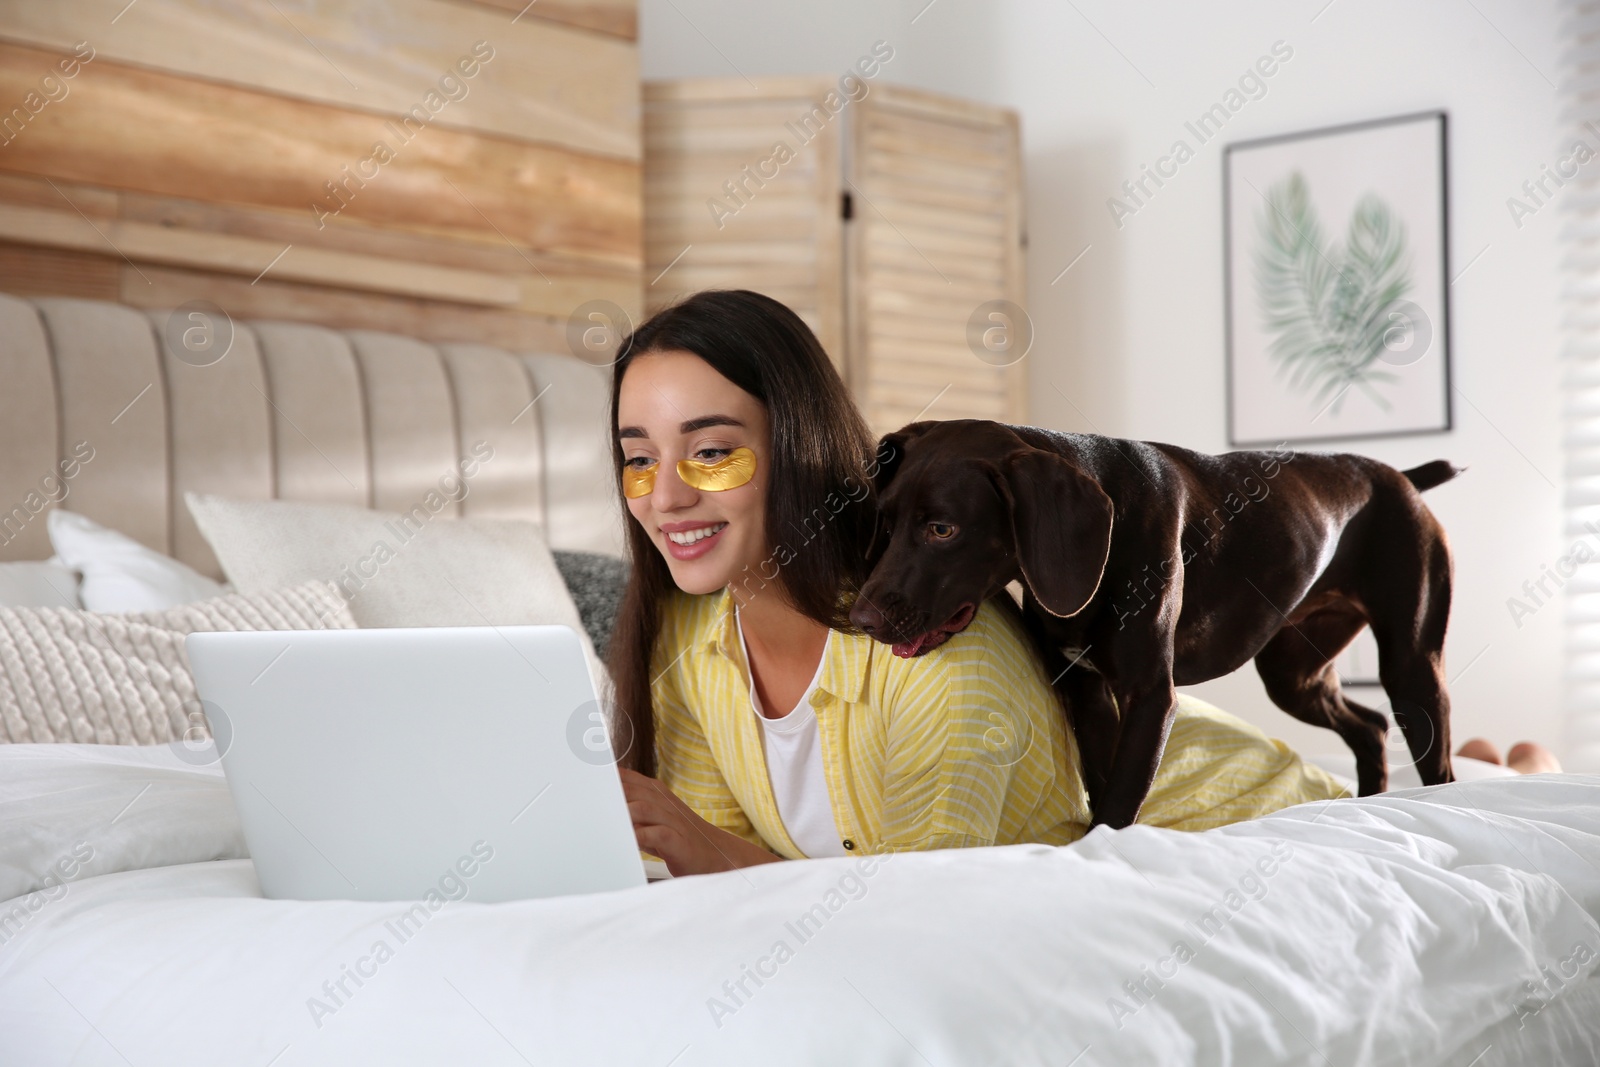 Photo of Young woman with eye patches working on laptop near her dog in bedroom. Home office concept